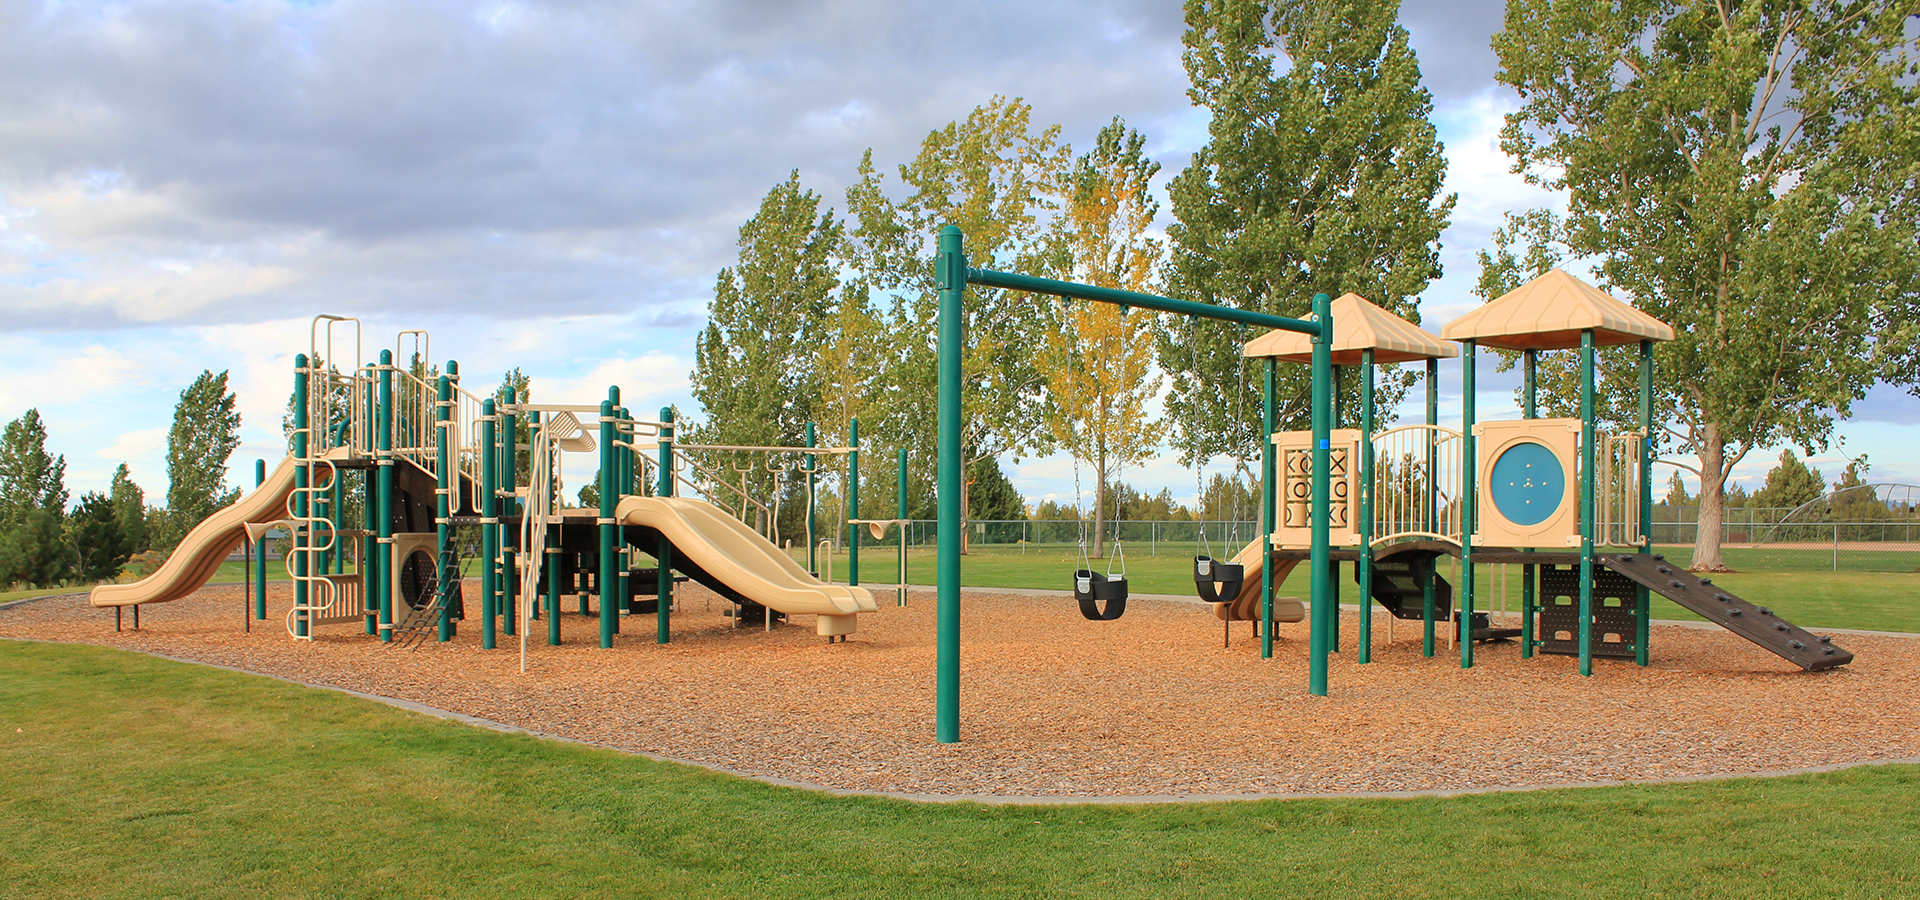 The play structure at Big Sky Park.